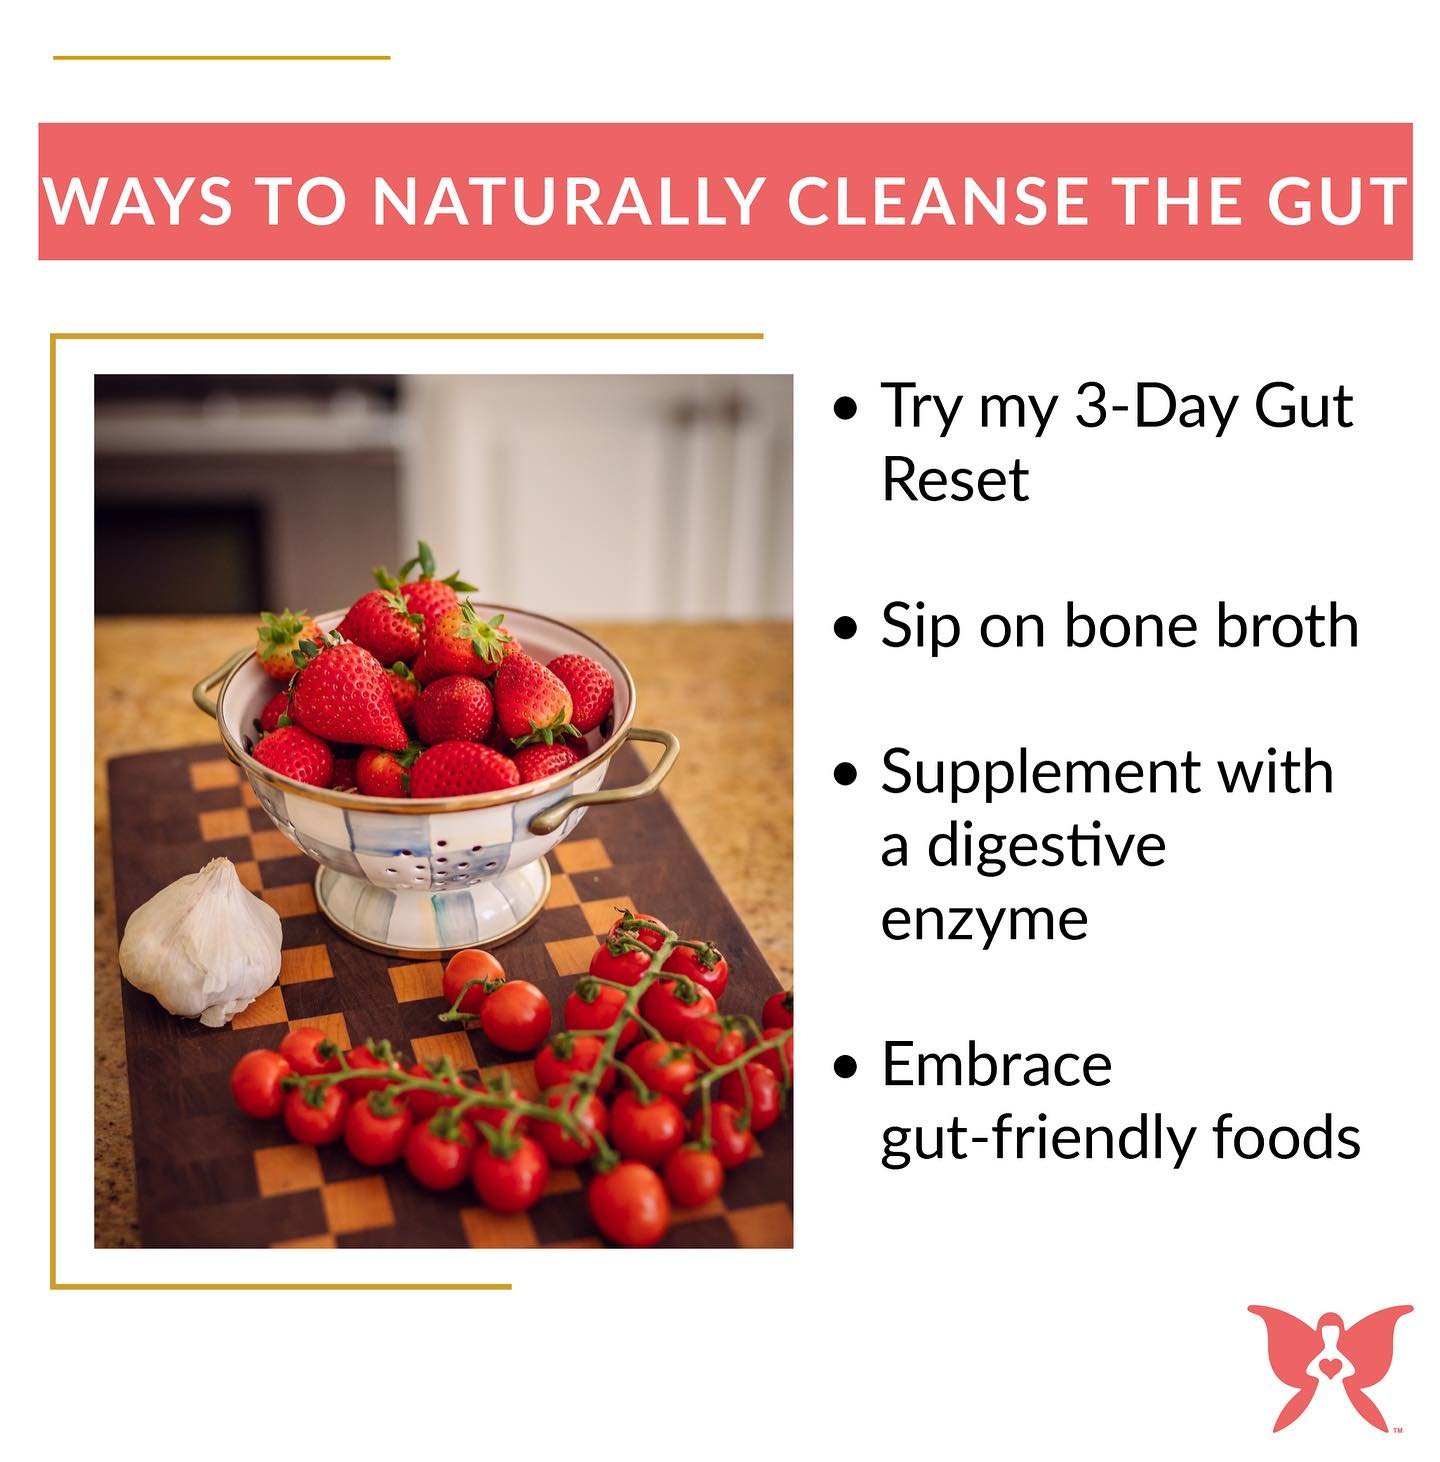 We&rsquo;re officially into the spring season, the perfect time to get serious about your gut health. Instead of investing in fad cleanses, supporting the gut can be the best cleanse as the gut is your body&rsquo;s own natural elimination and detoxif